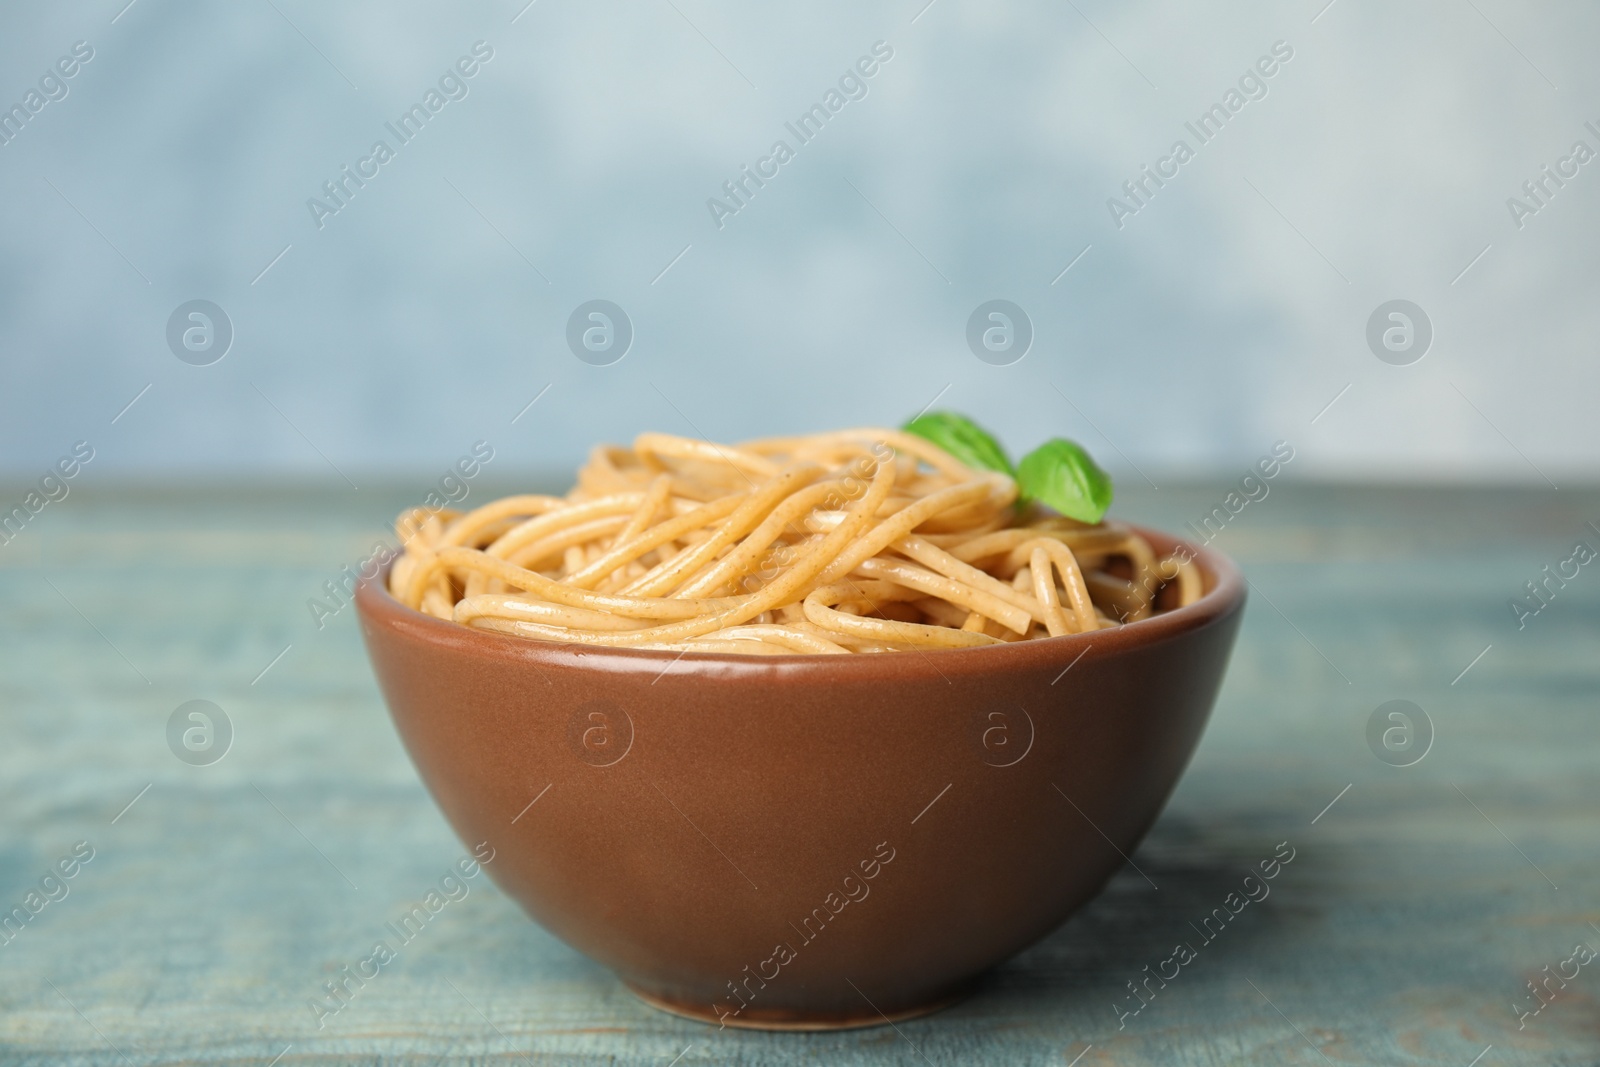 Photo of Tasty buckwheat noodles in bowl on blue wooden table